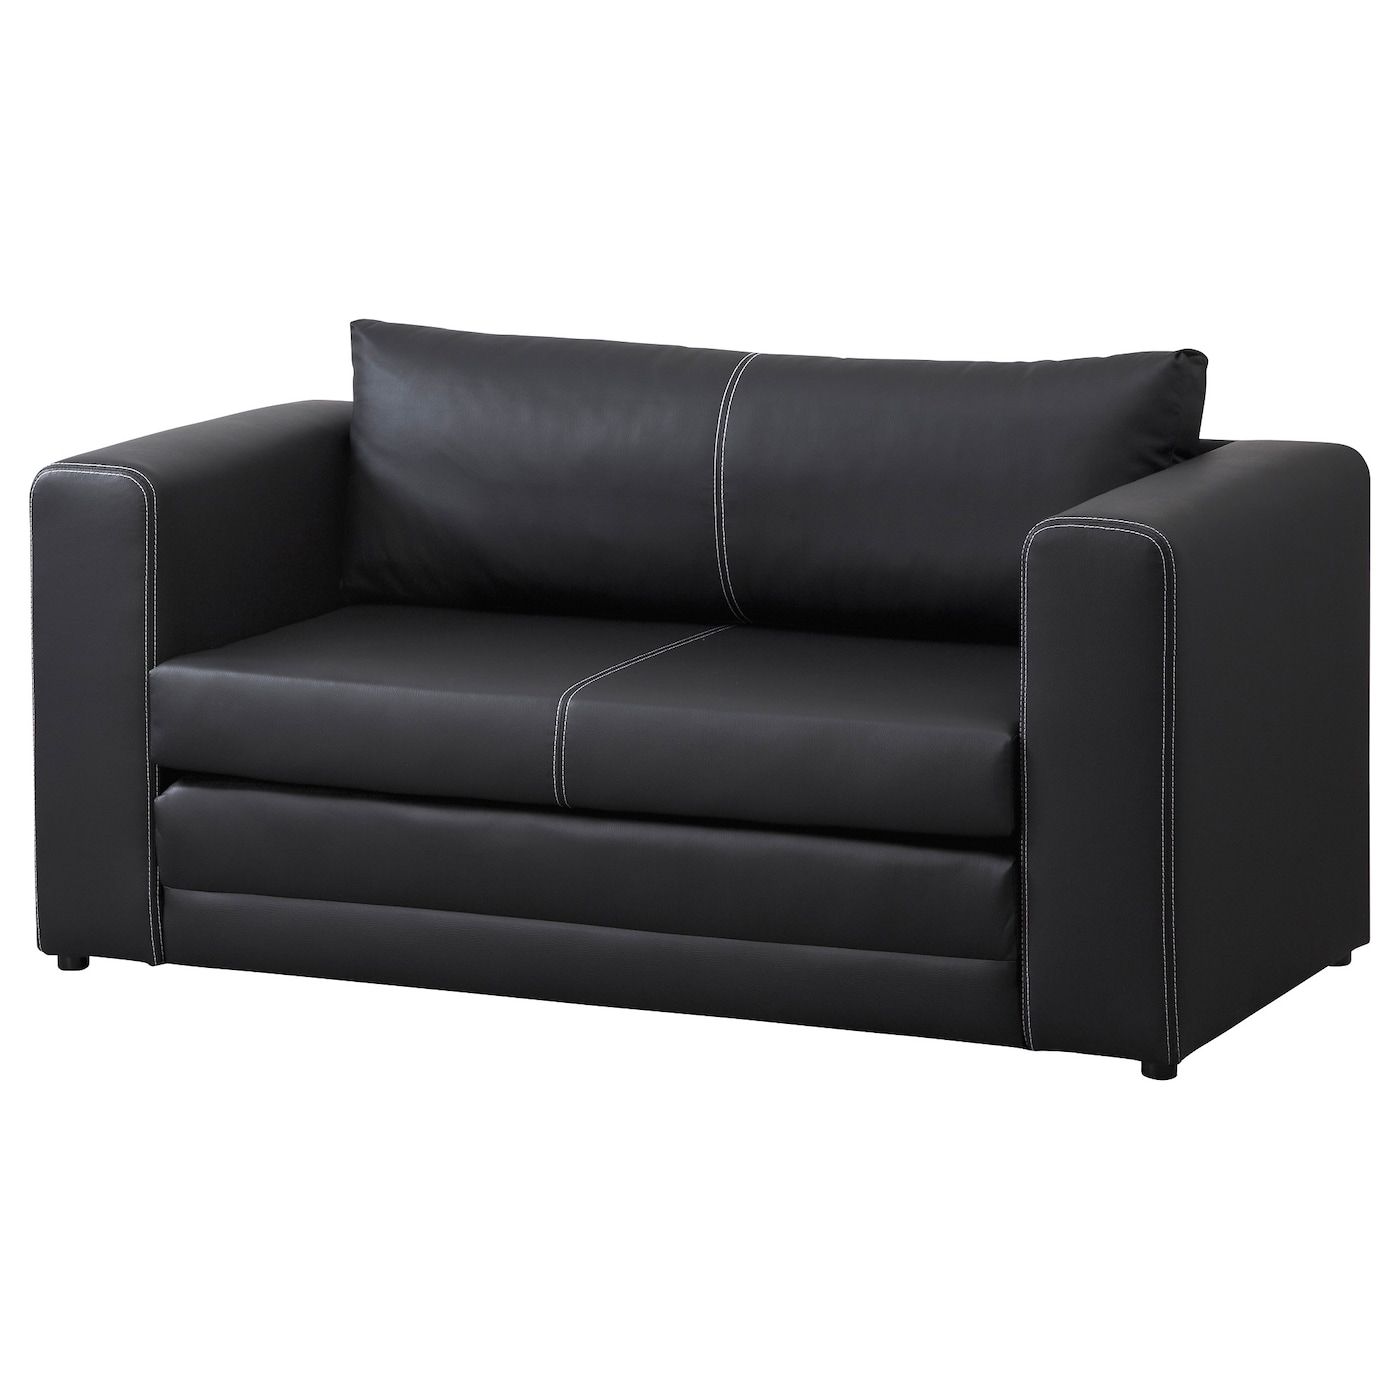 Askeby Black, Two Seat Sofa Bed – Ikea In Black Velvet 2 Seater Sofa Beds (Gallery 7 of 20)